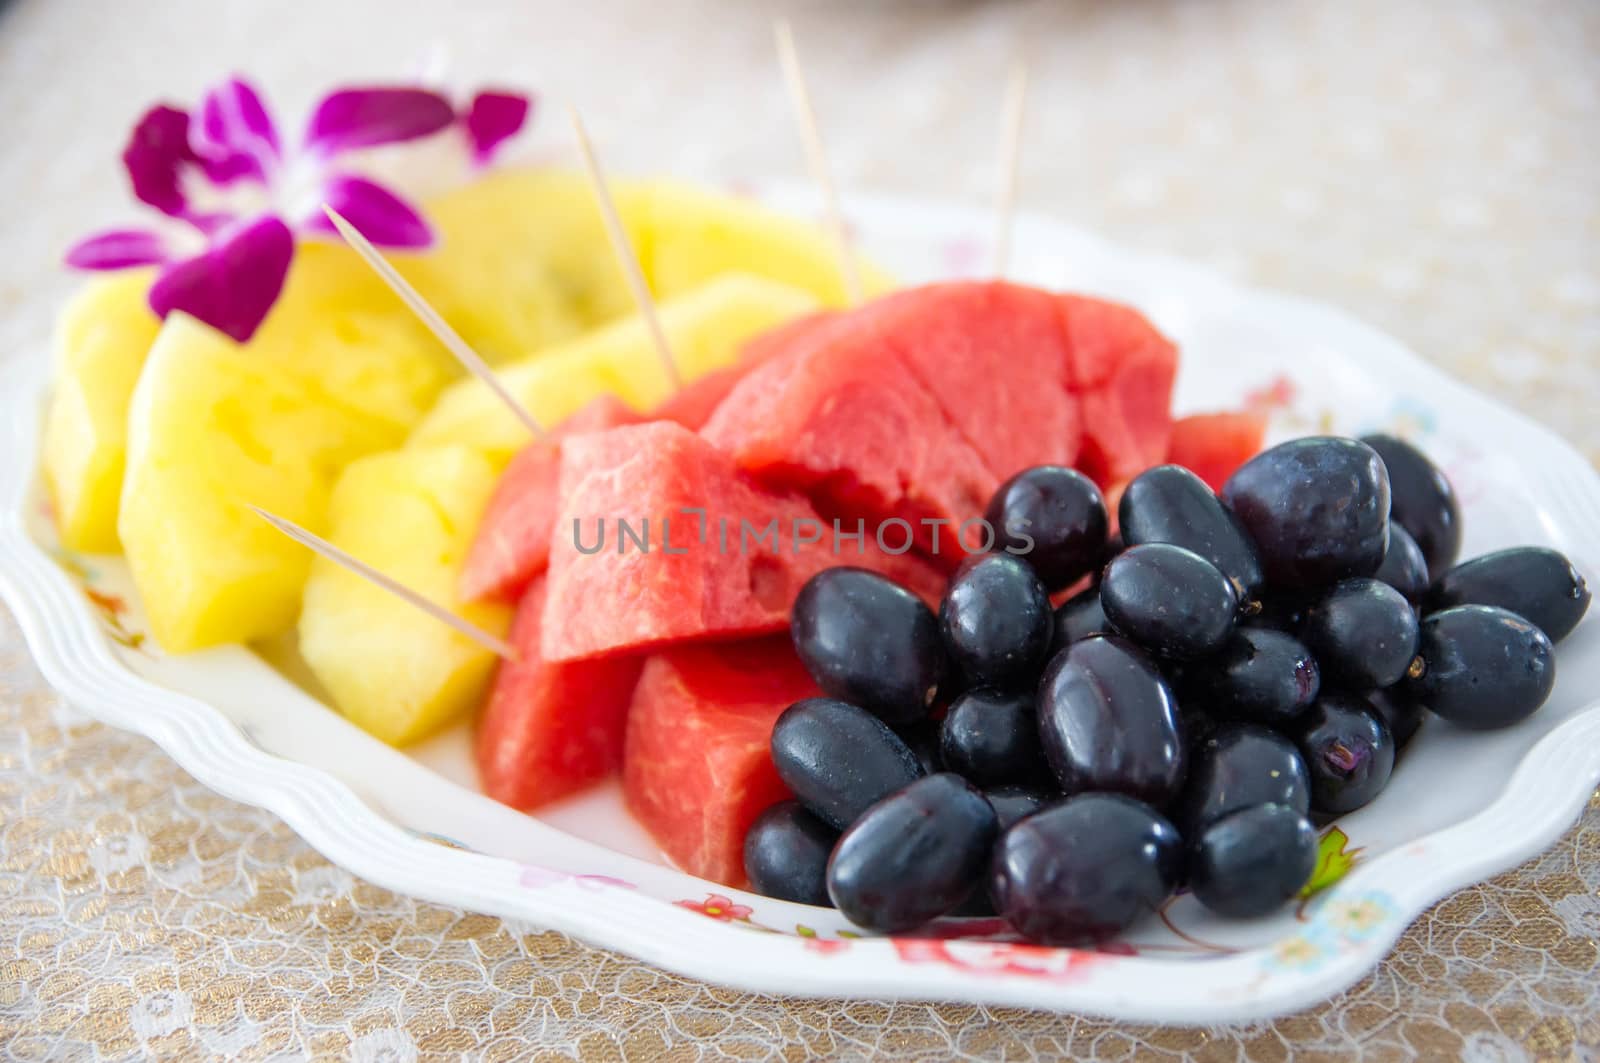 Mixed fruit in the dish on table.